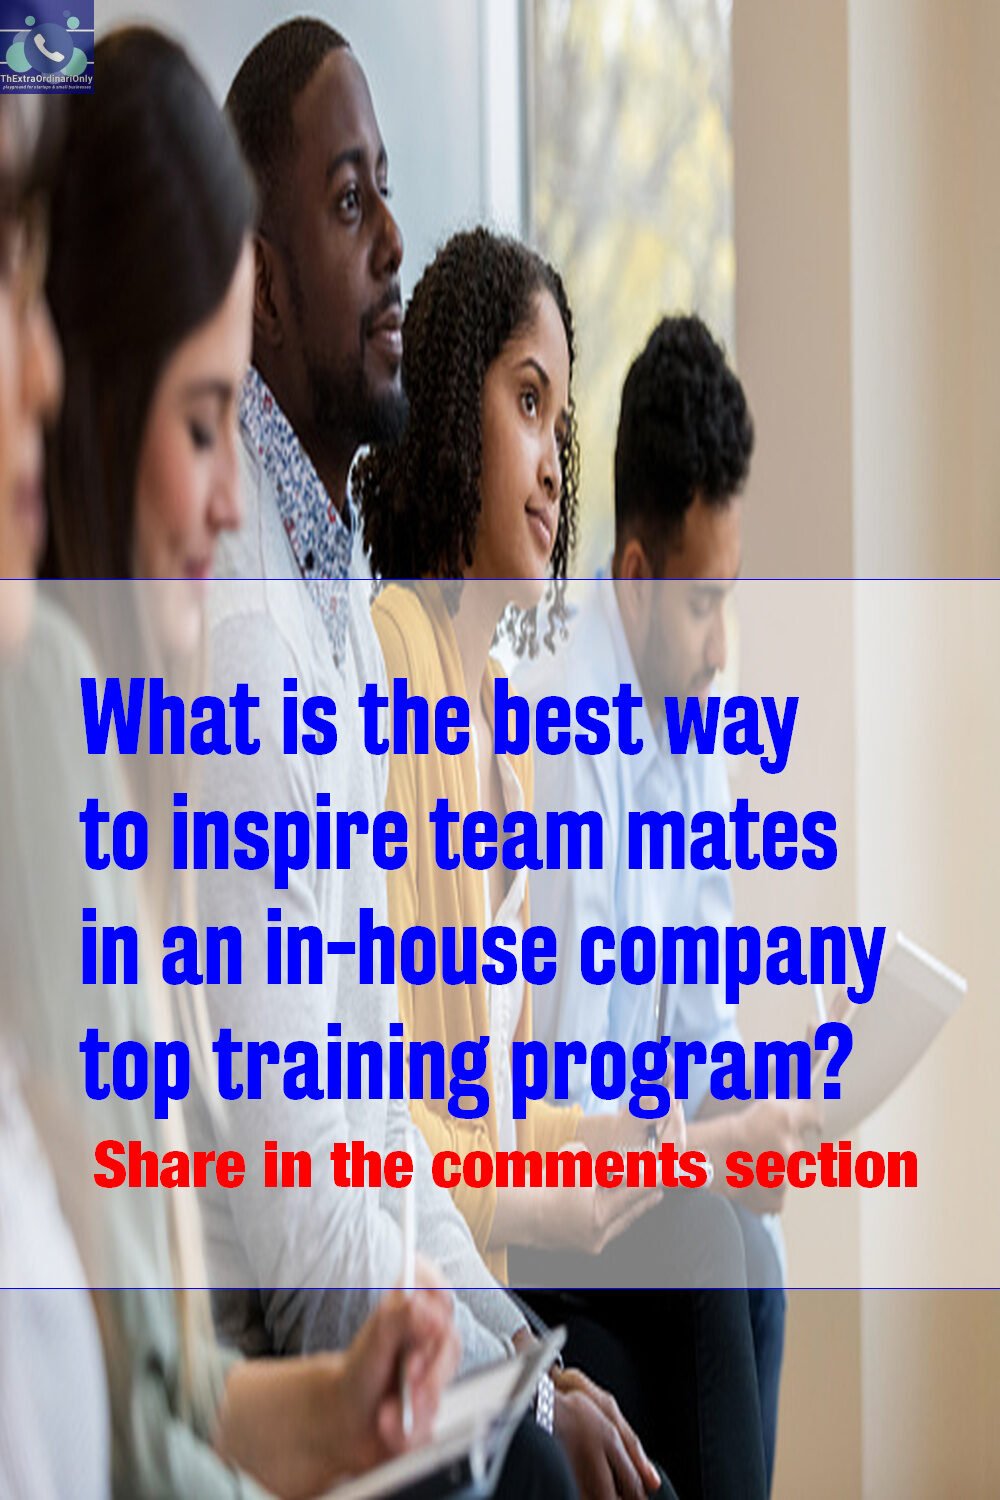 what is the best way to inspire team mates in in-house company top training program